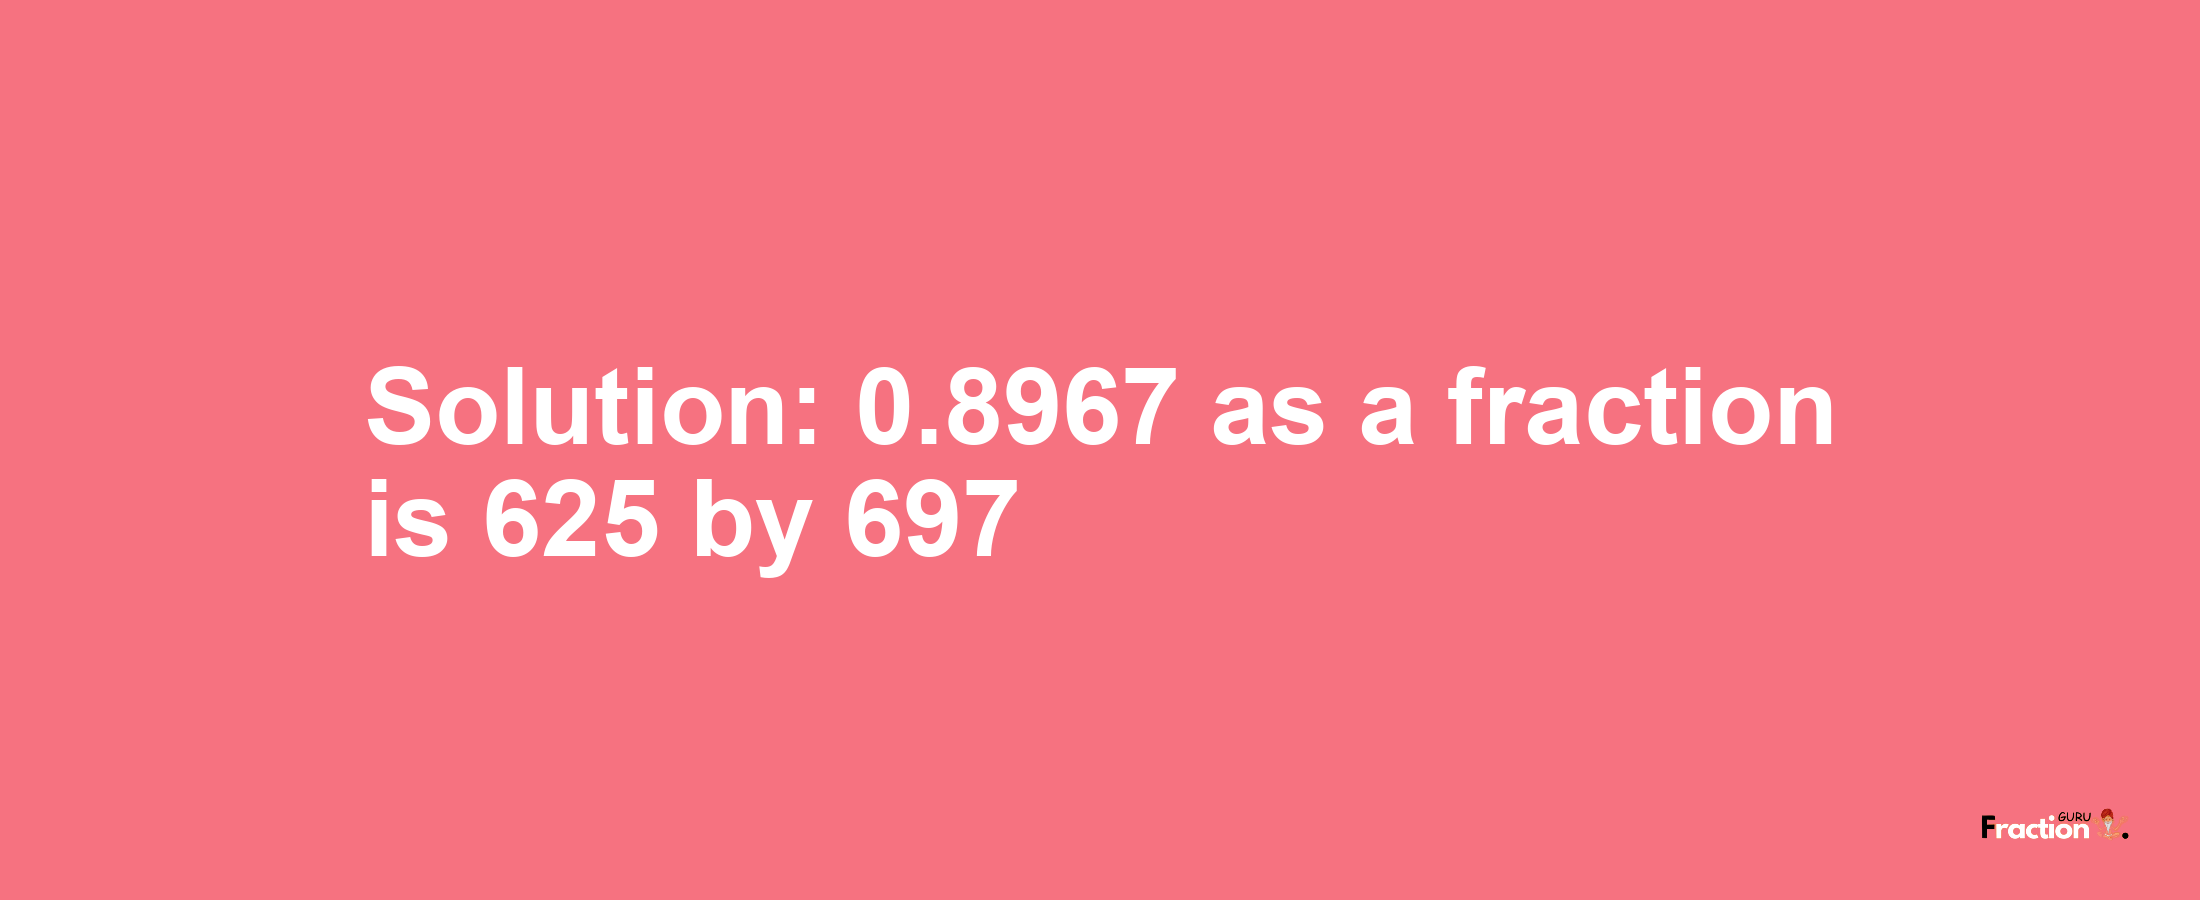 Solution:0.8967 as a fraction is 625/697